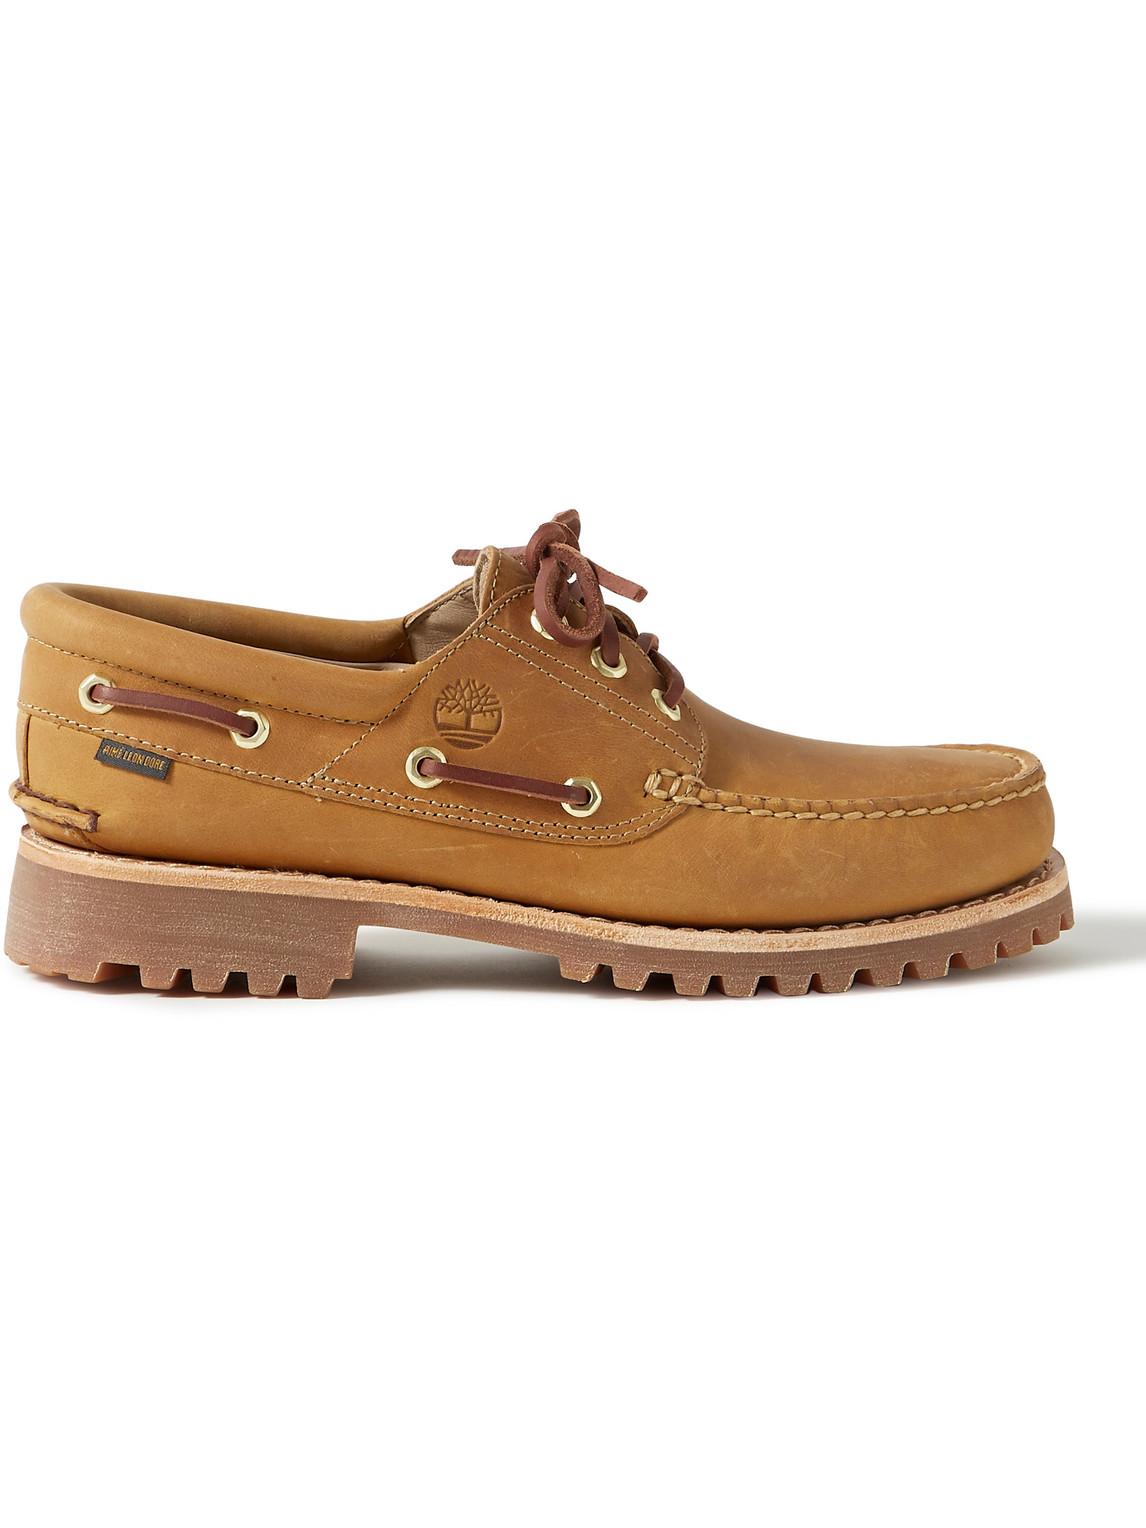 Timberland Aimé Leon Dore 3-eye Lug Nubuck Boat Shoes in Brown for Men |  Lyst